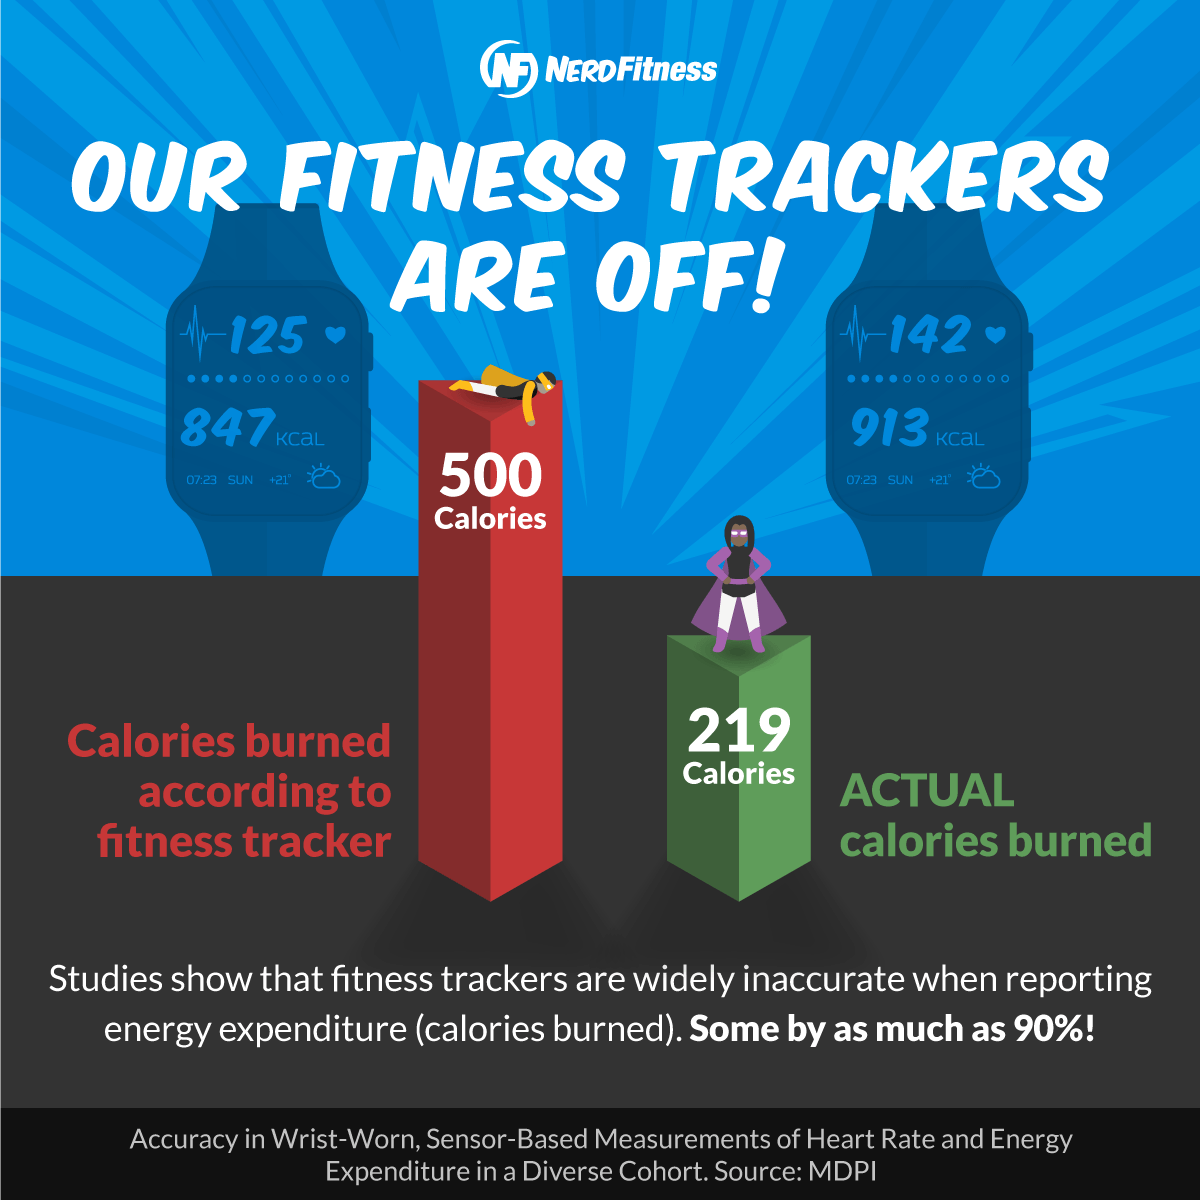 This infographic shows calorie discrepancies from fitness trackers compared to actual calories burned.